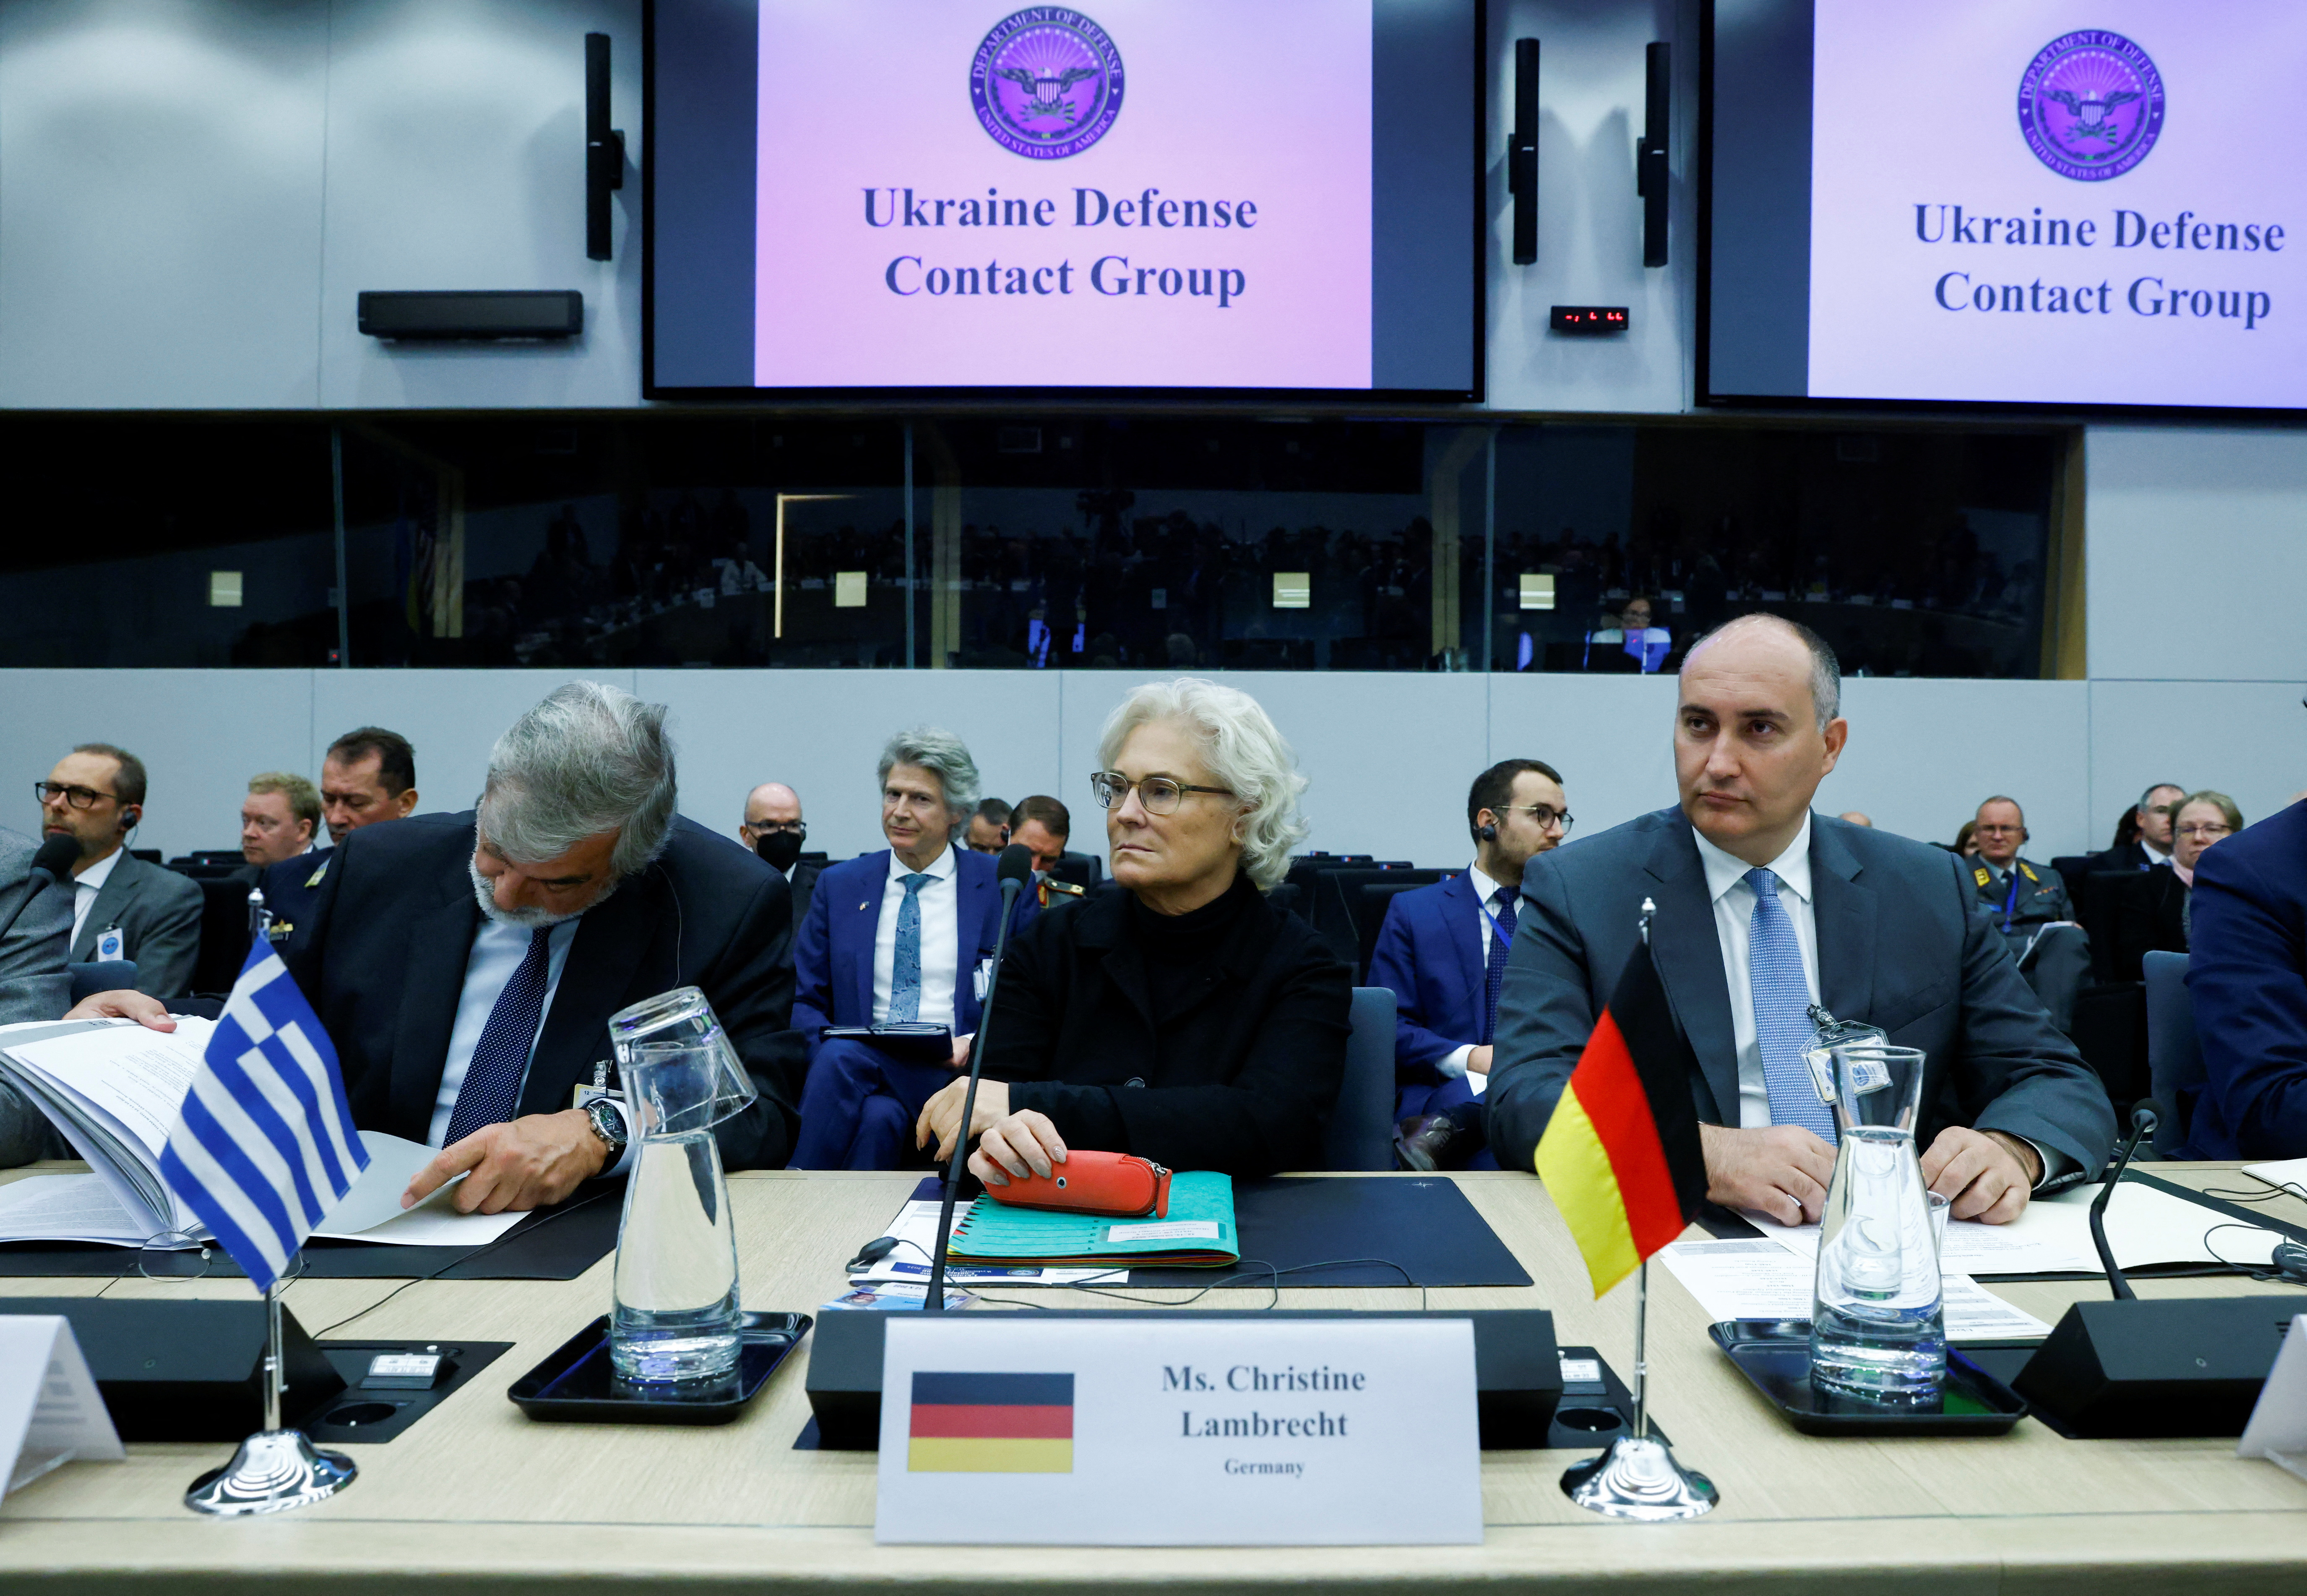 Meeting of the Ukraine Defence Contact Group during a NATO defence ministers meeting at the Alliance's headquarters in Brussels